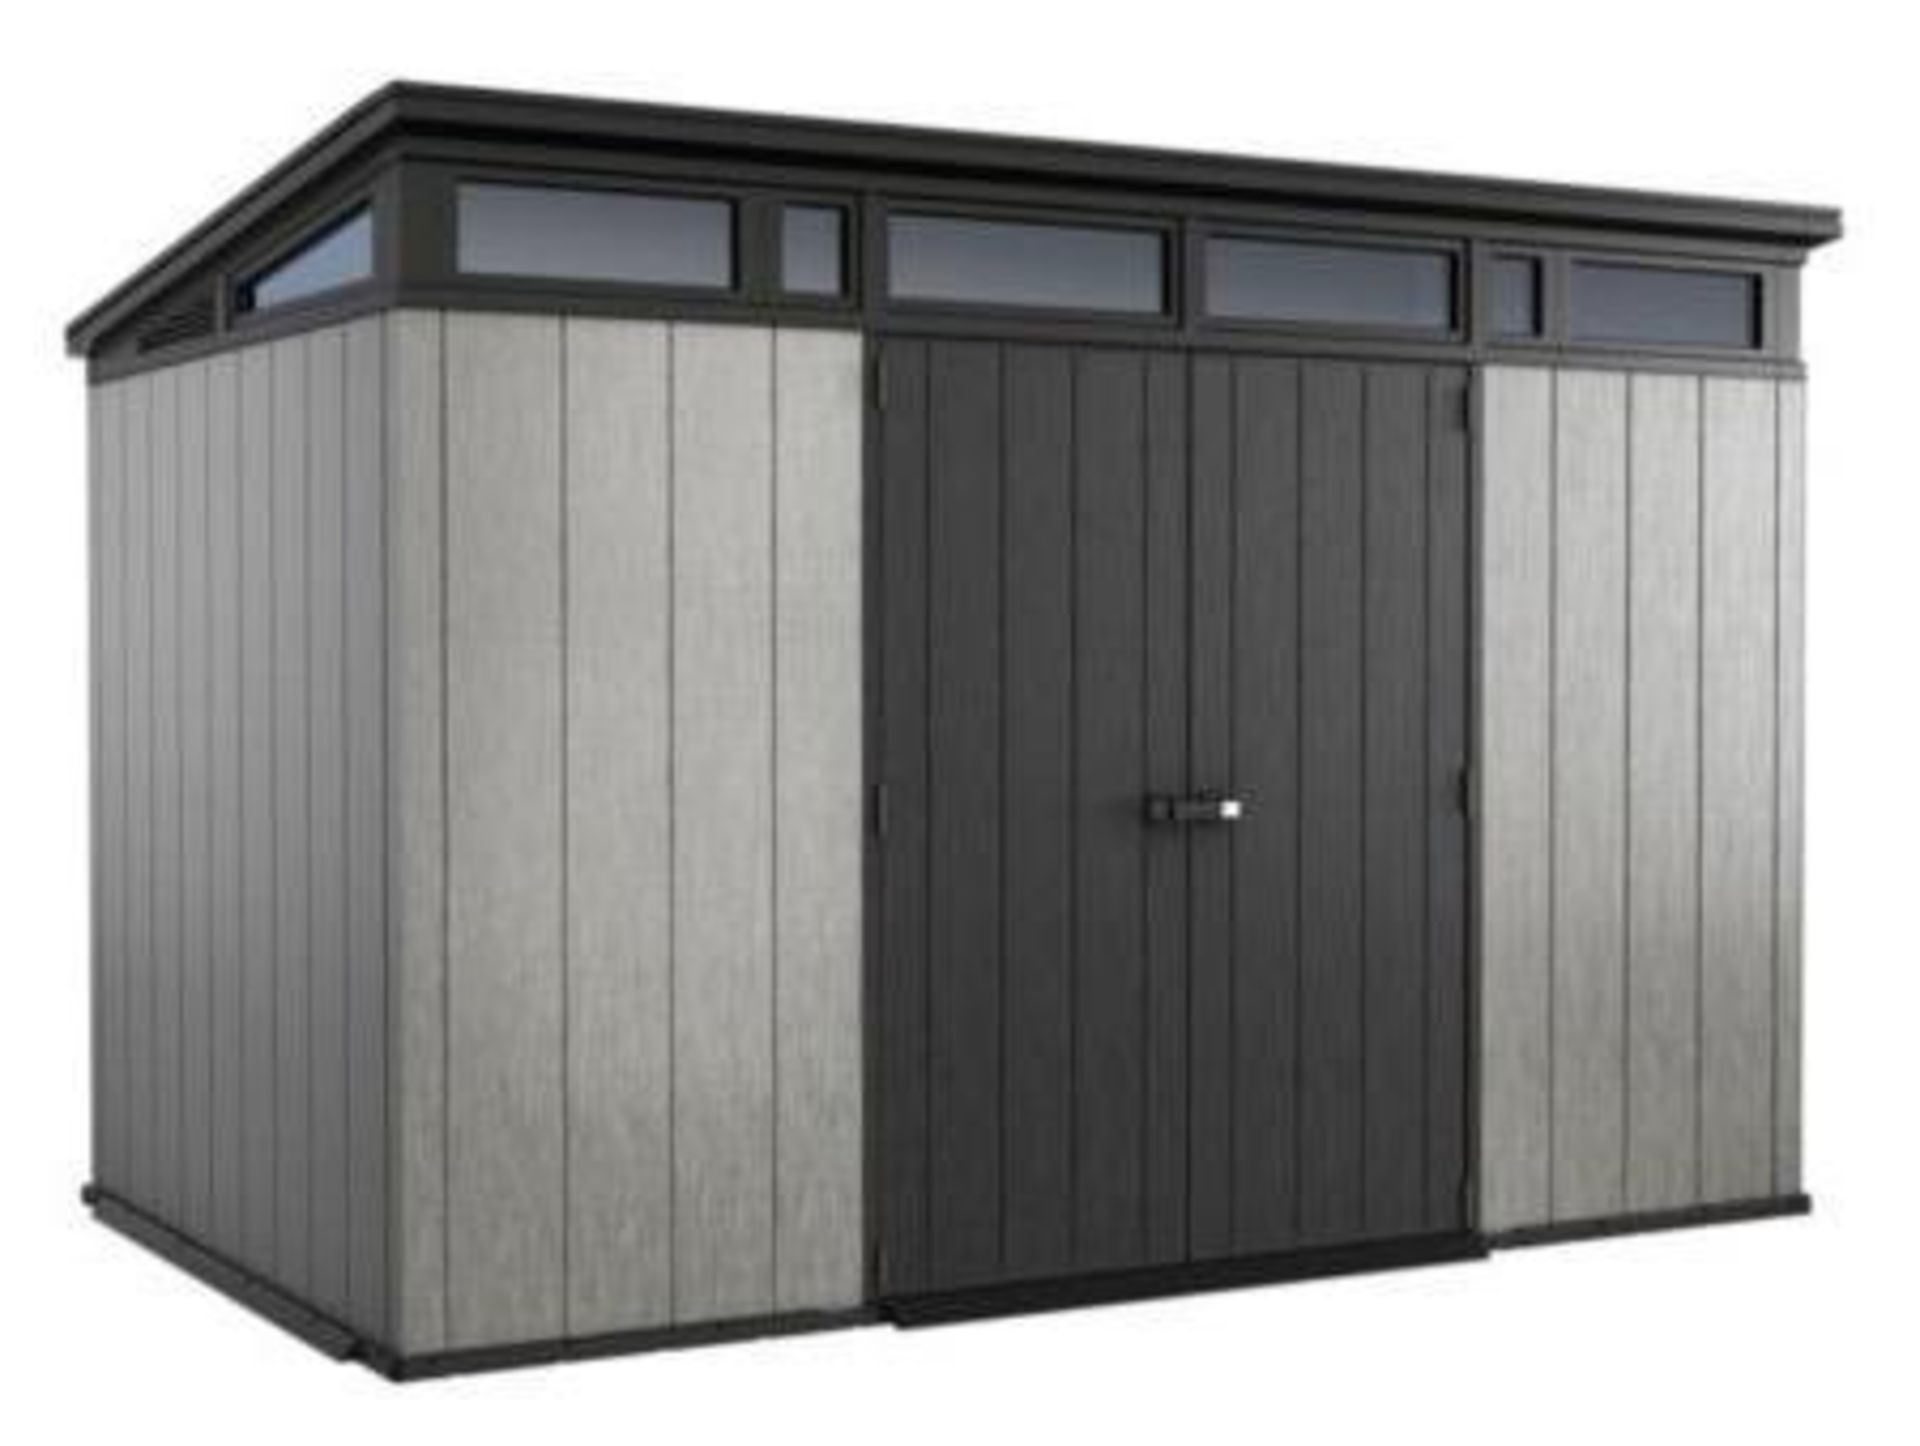 Keter Shed